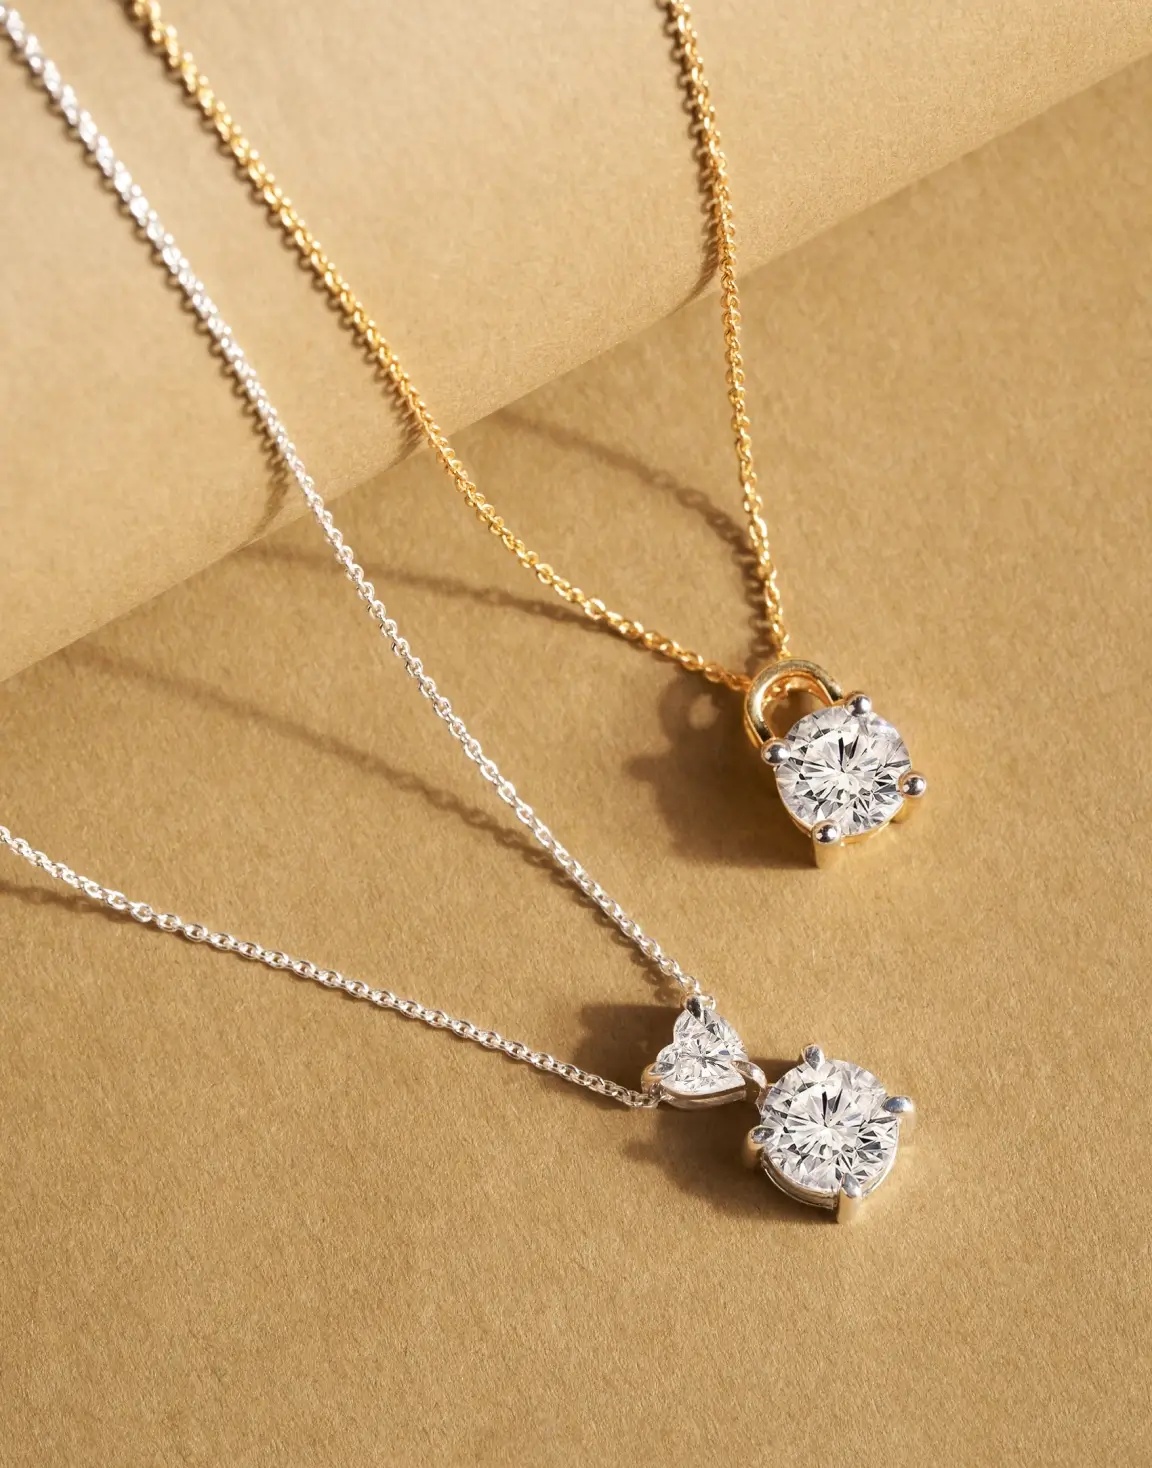 Gifting Grace: Single Diamond Pendants for Special Celebrations